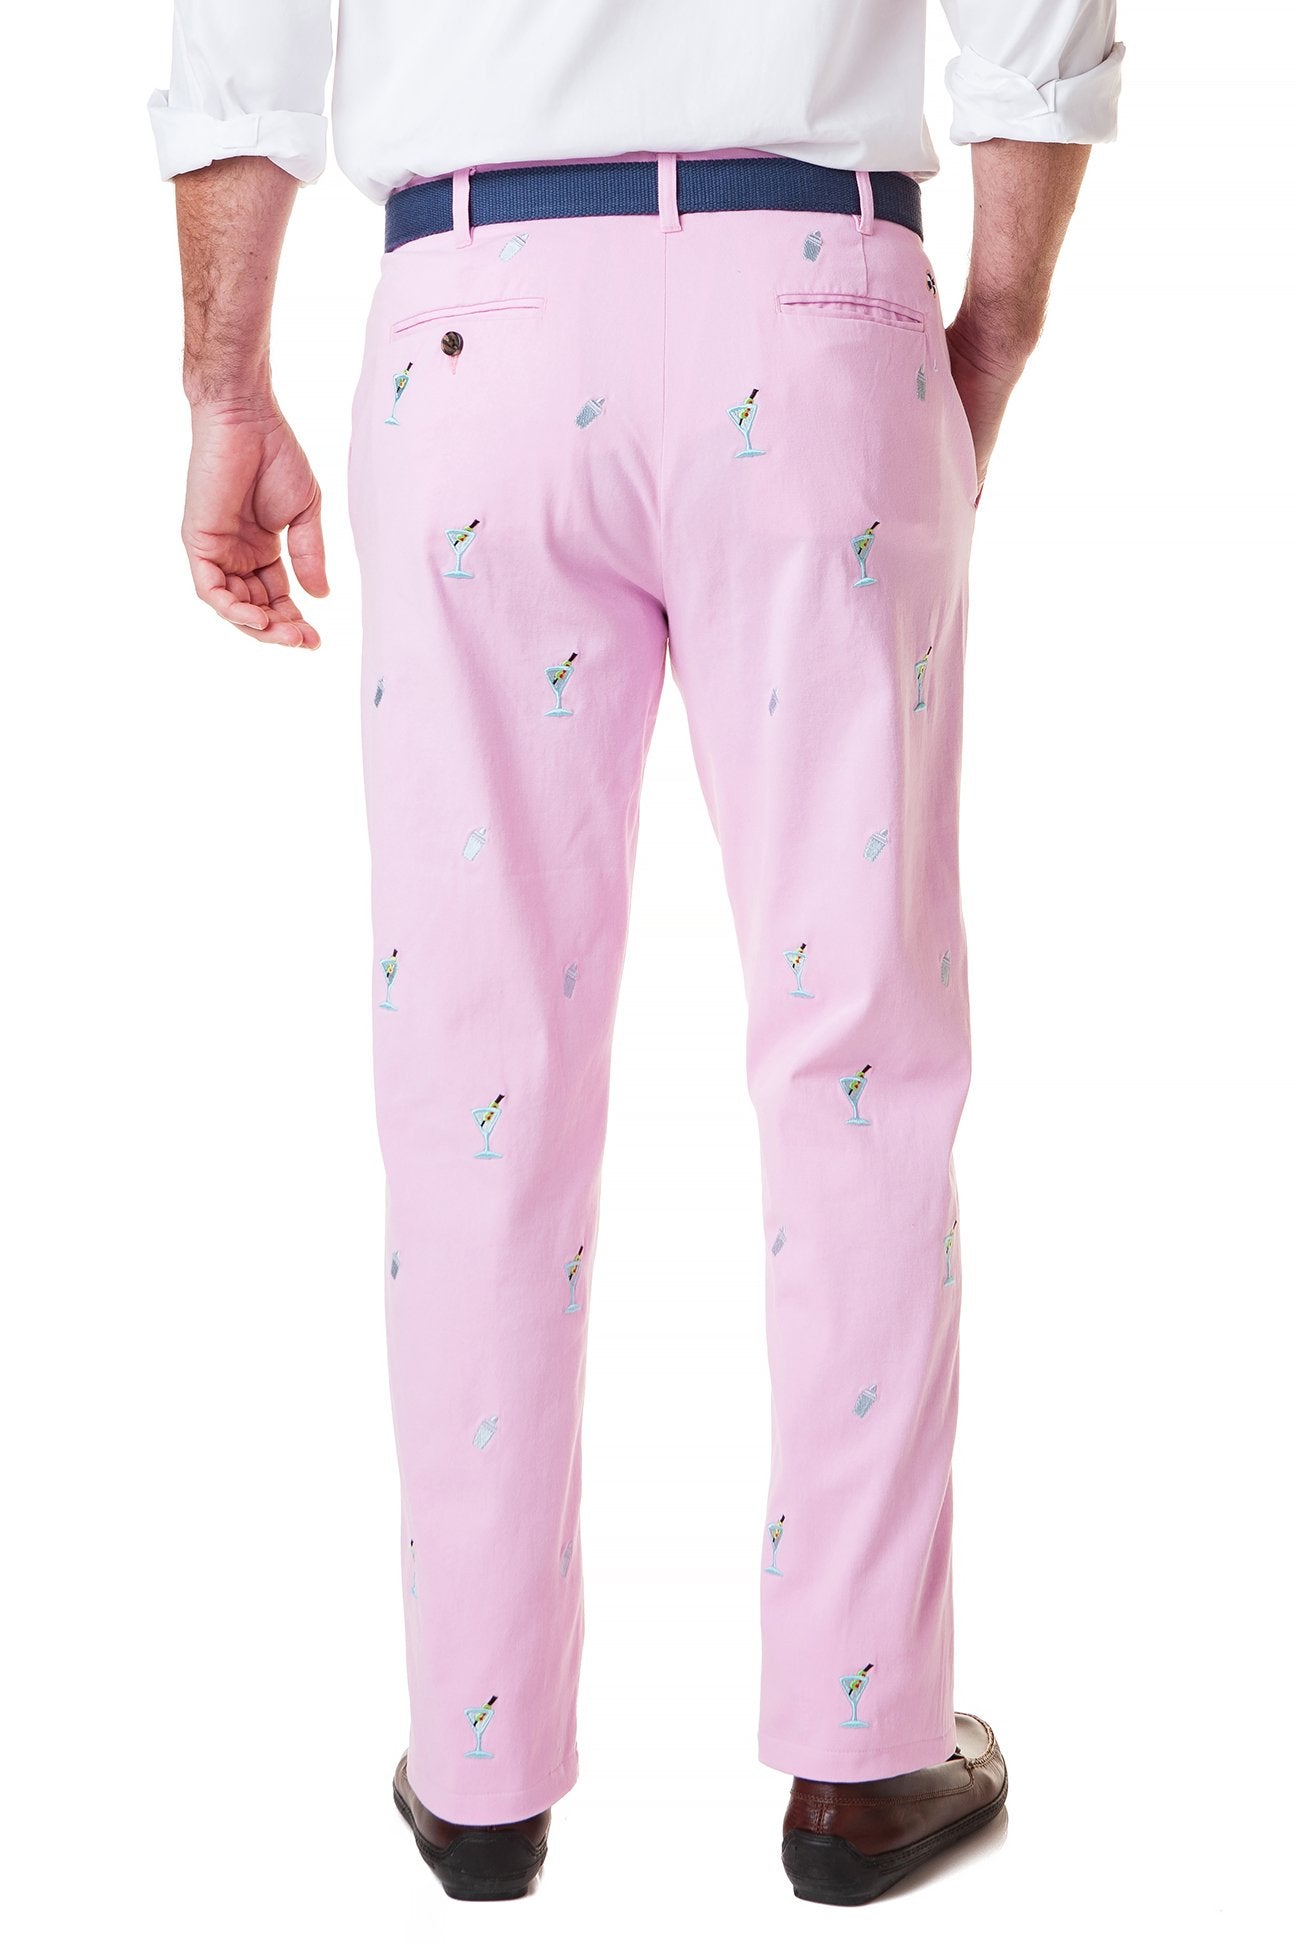 Harbor Pant Stretch Twill Pink with Martini & Shaker - Castaway Nantucket Island